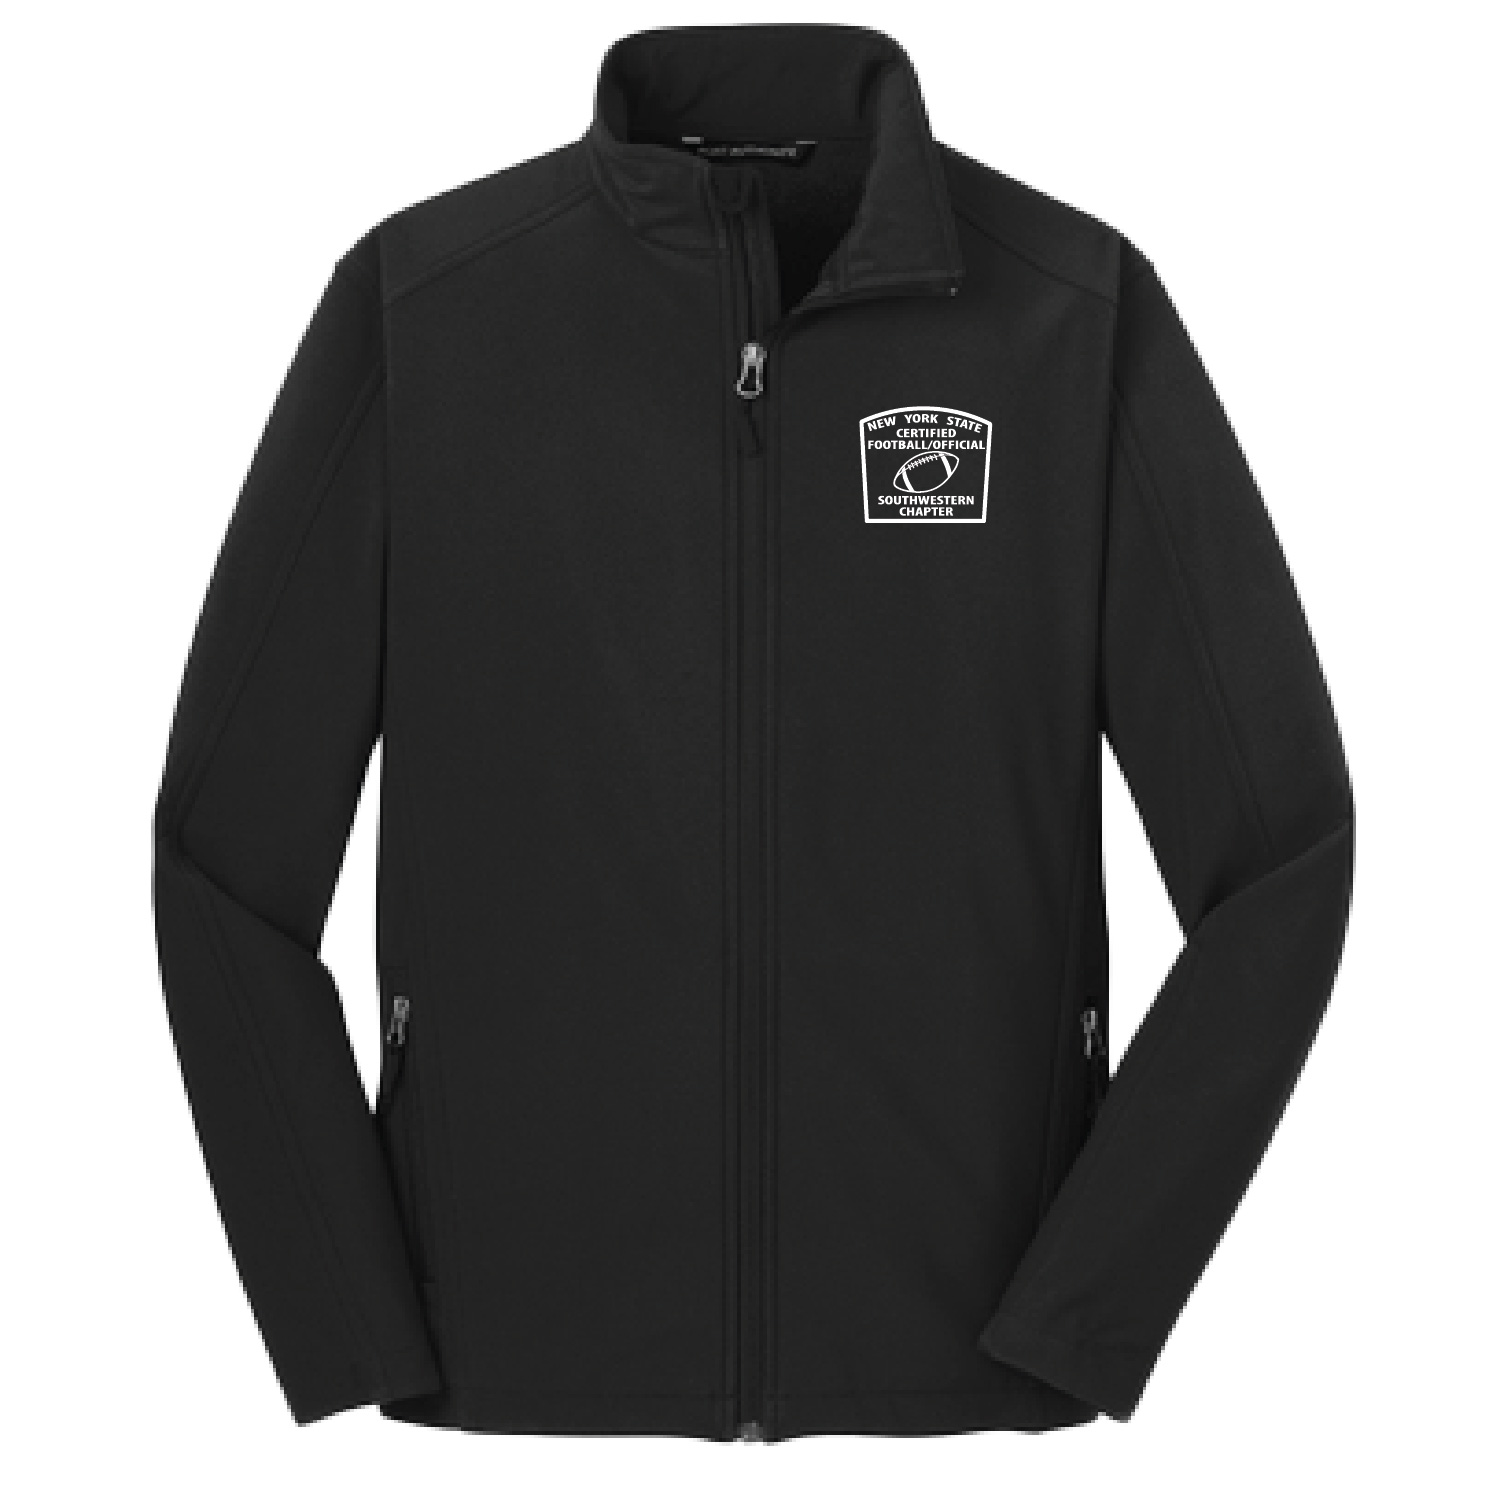 NYS Certified Football Official Apparel- Black Soft Shell Jacket- Emb. product image